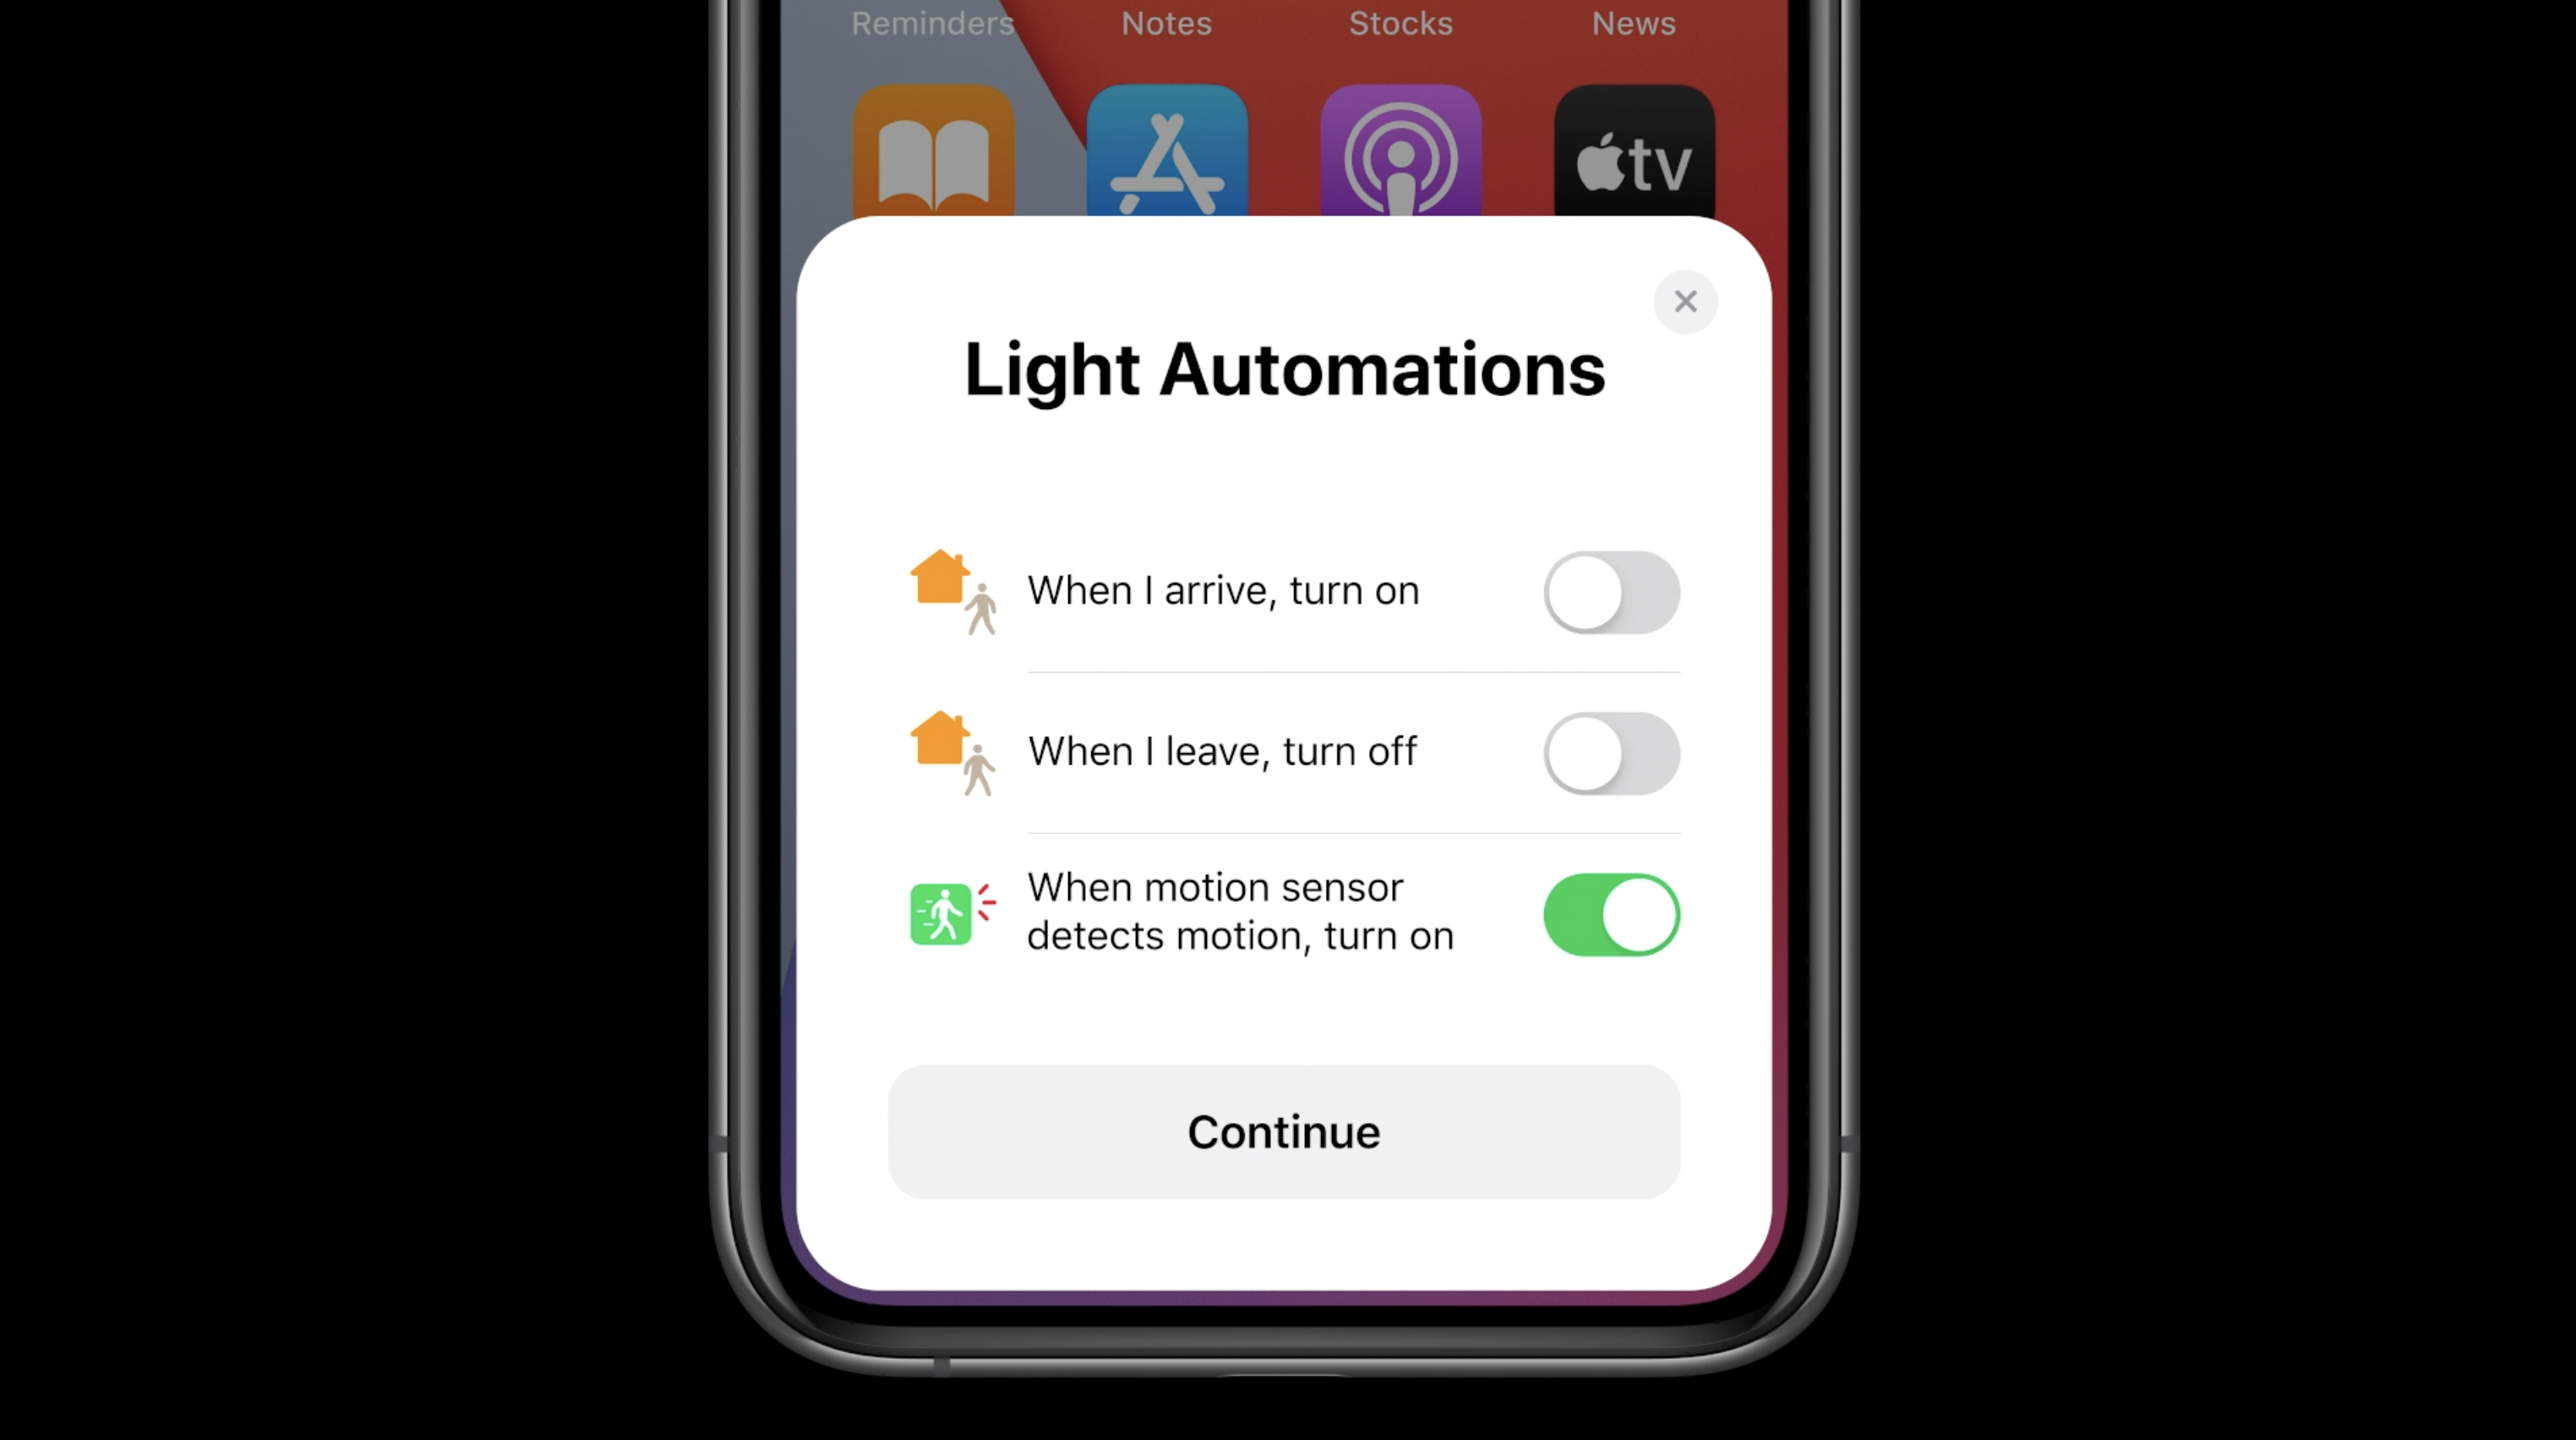 HomeKit: Devices, Reviews, Workflows, and Use Cases - 9to5Mac